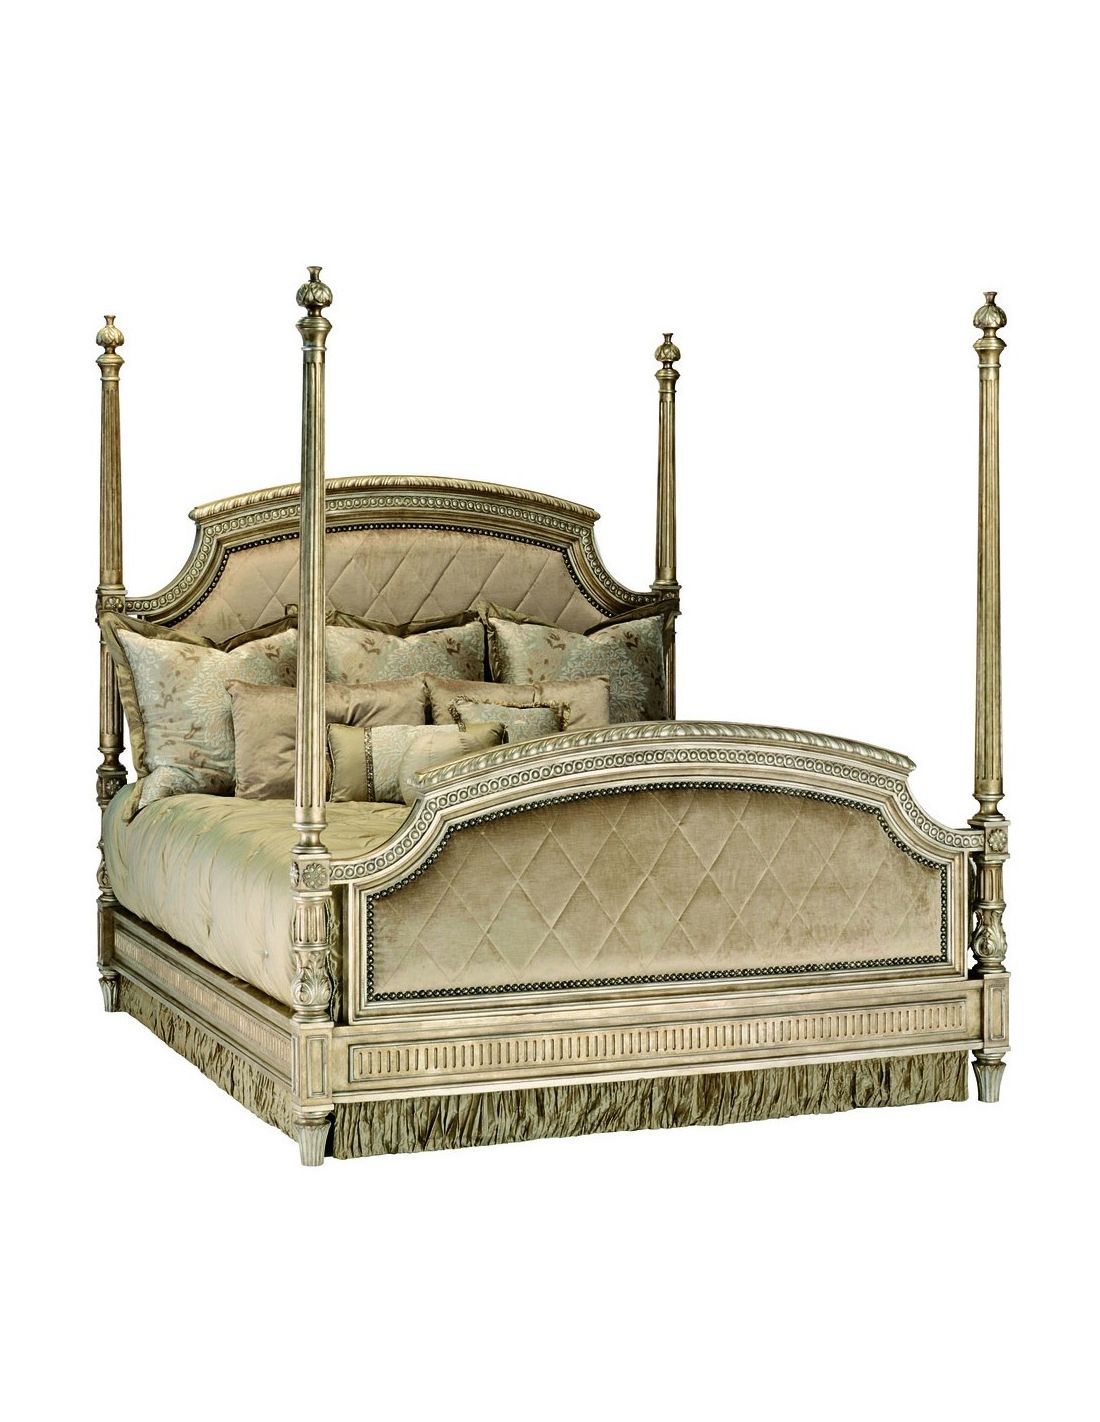 Intricate Hand Carved Wooden Details, Four Post King Bed Frame